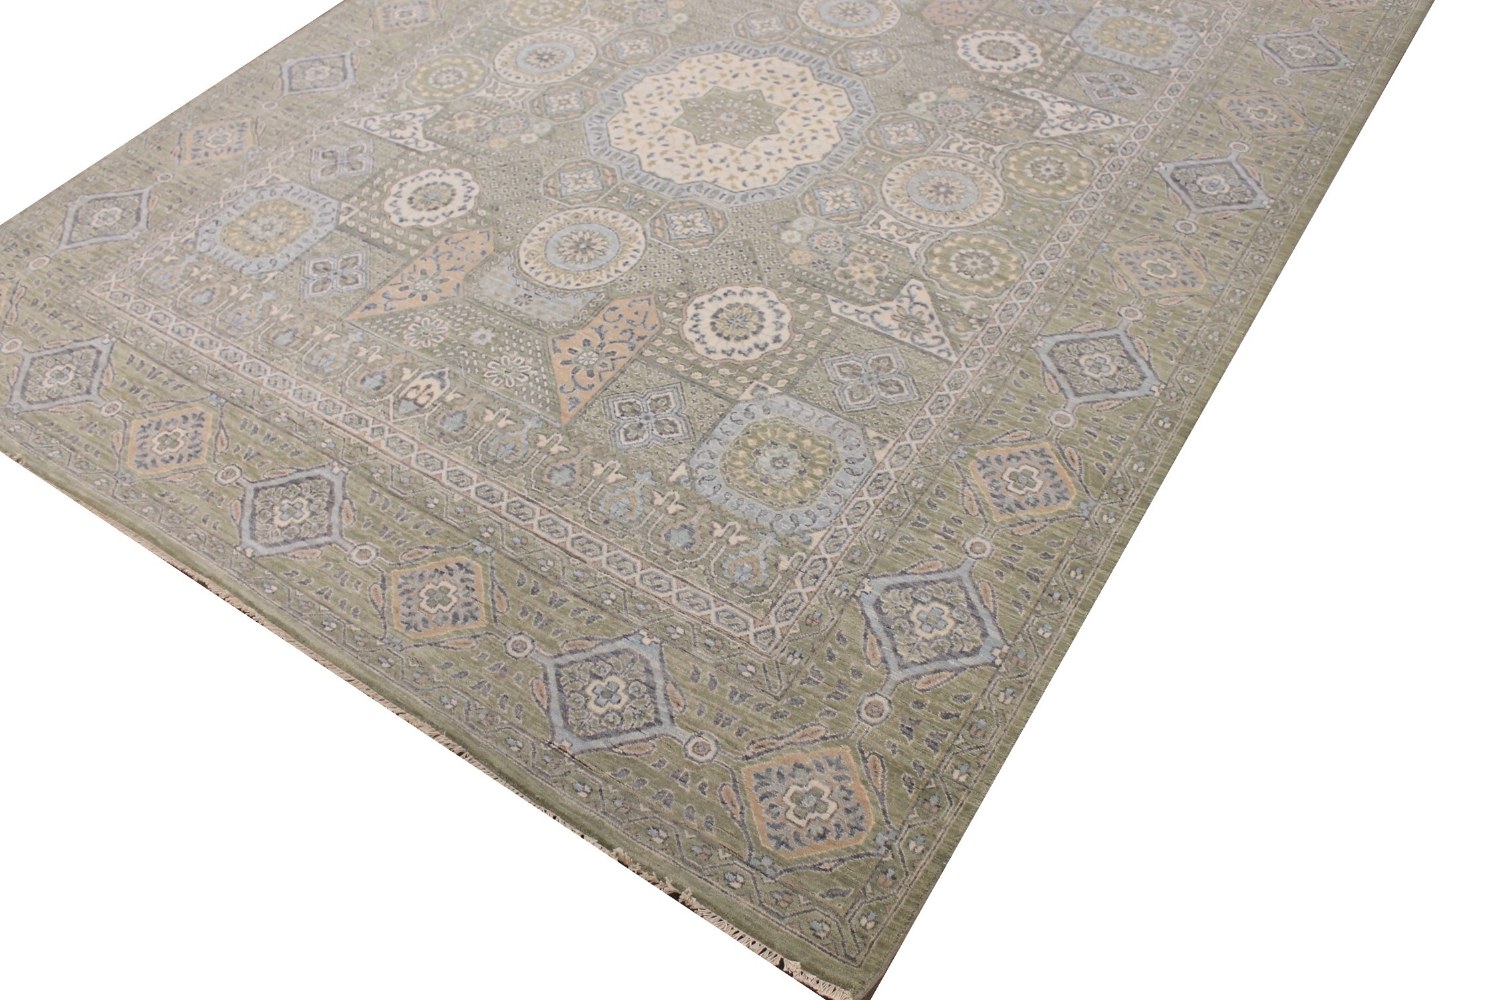 8x10 Traditional Hand Knotted Wool Area Rug - MR028699